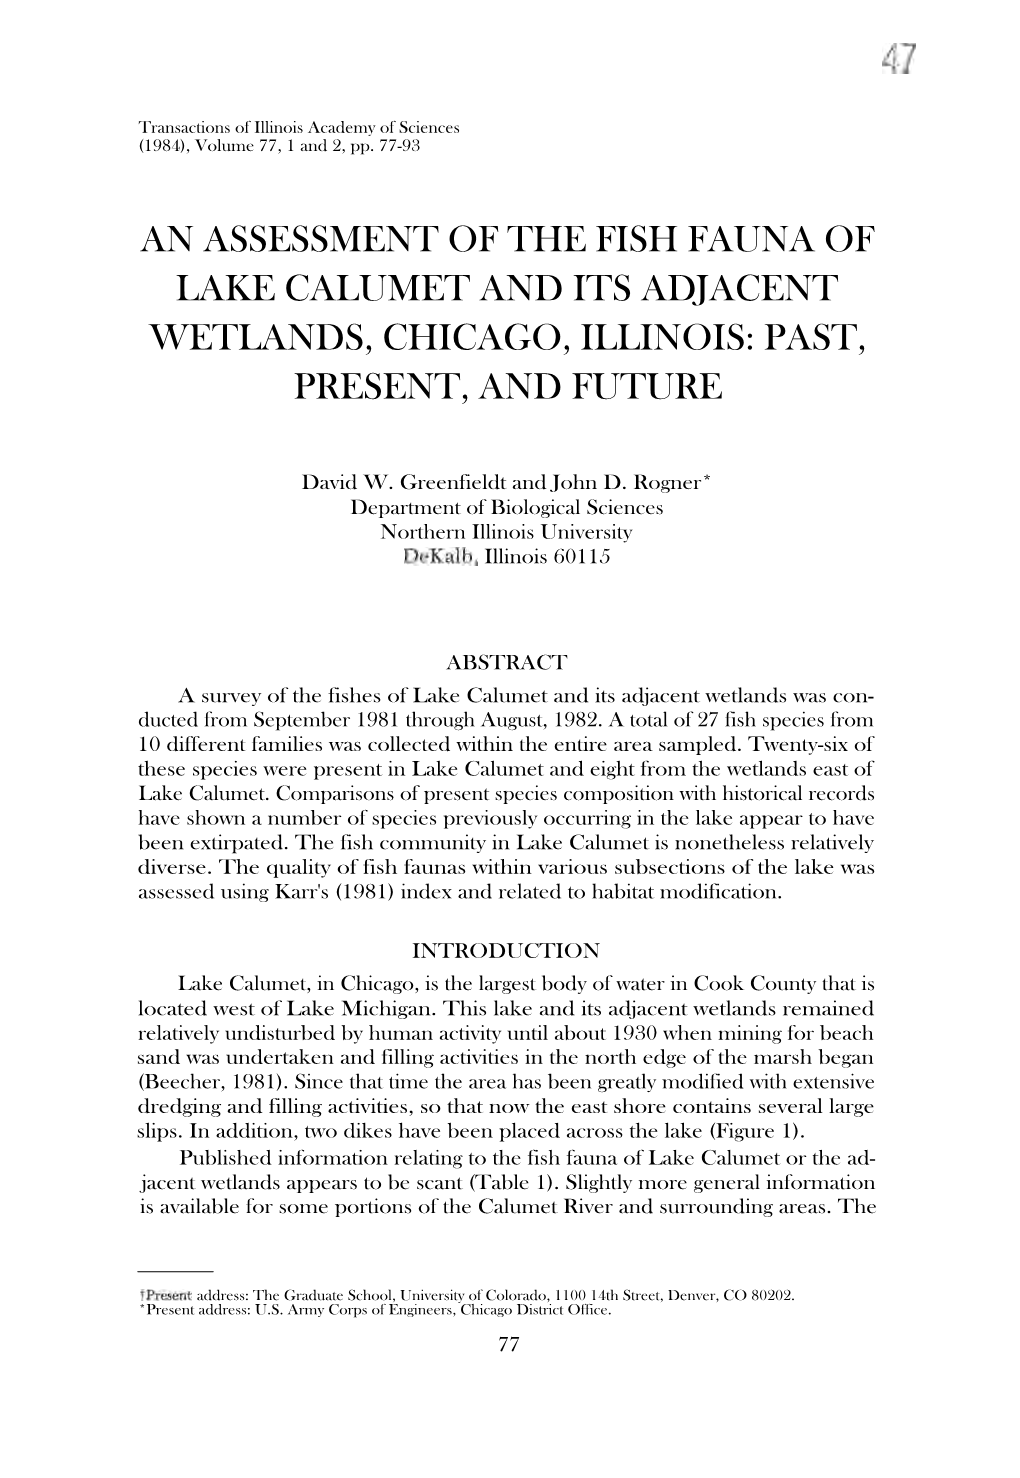 An Assessment of the Fish Fauna of Lake Calumet and Its Adjacent Wetlands, Chicago, Illinois: Past, Present, and Future